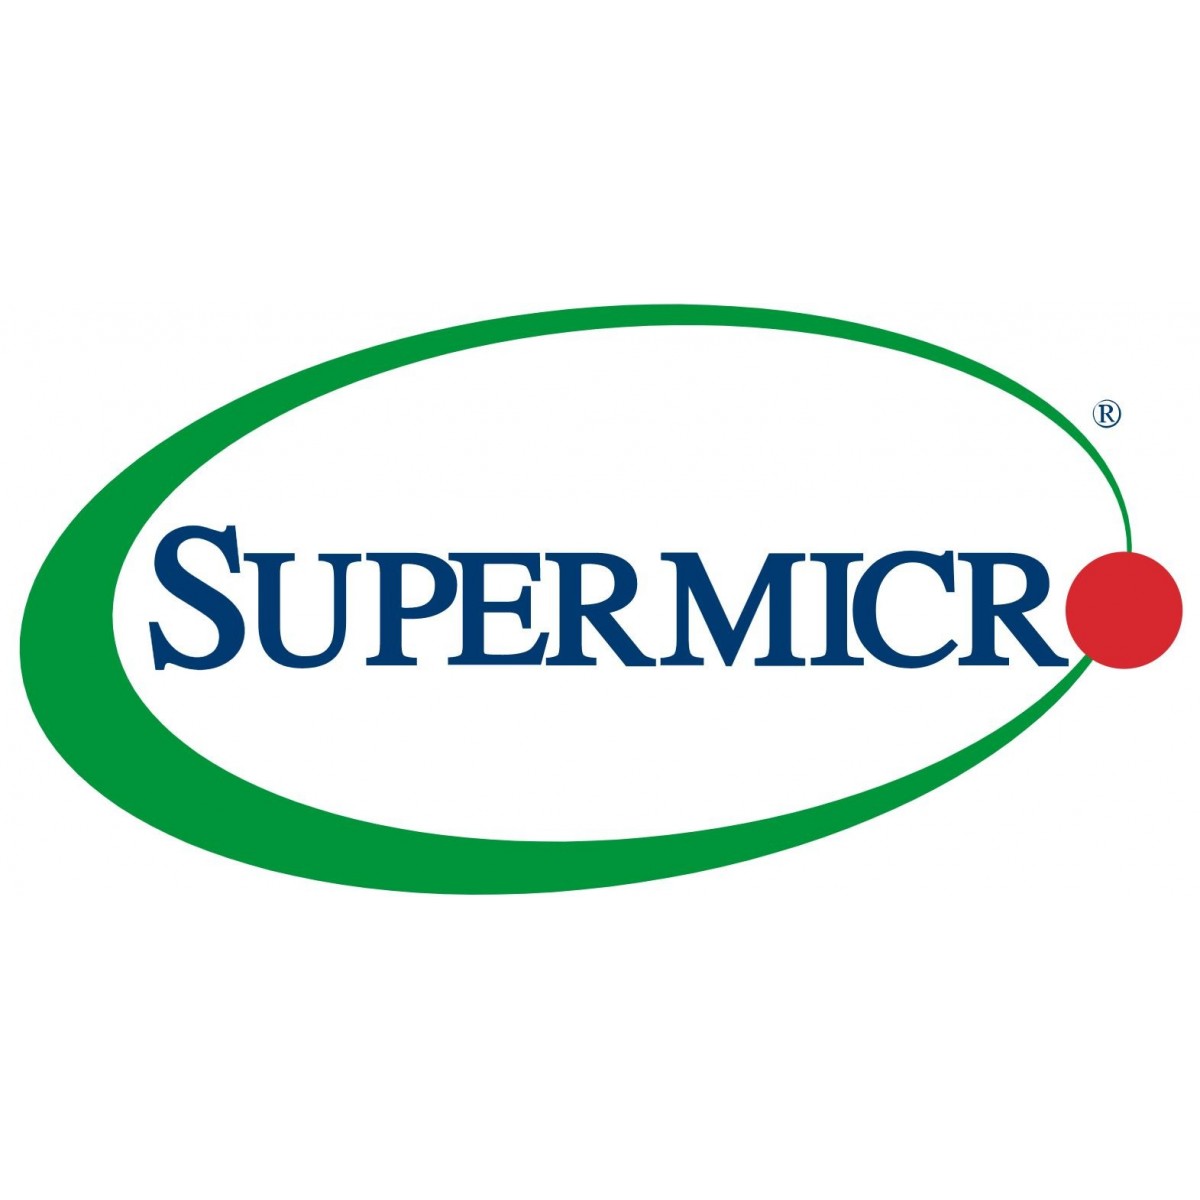 Supermicro Barebone UP SuperServer SYS-110P-WR